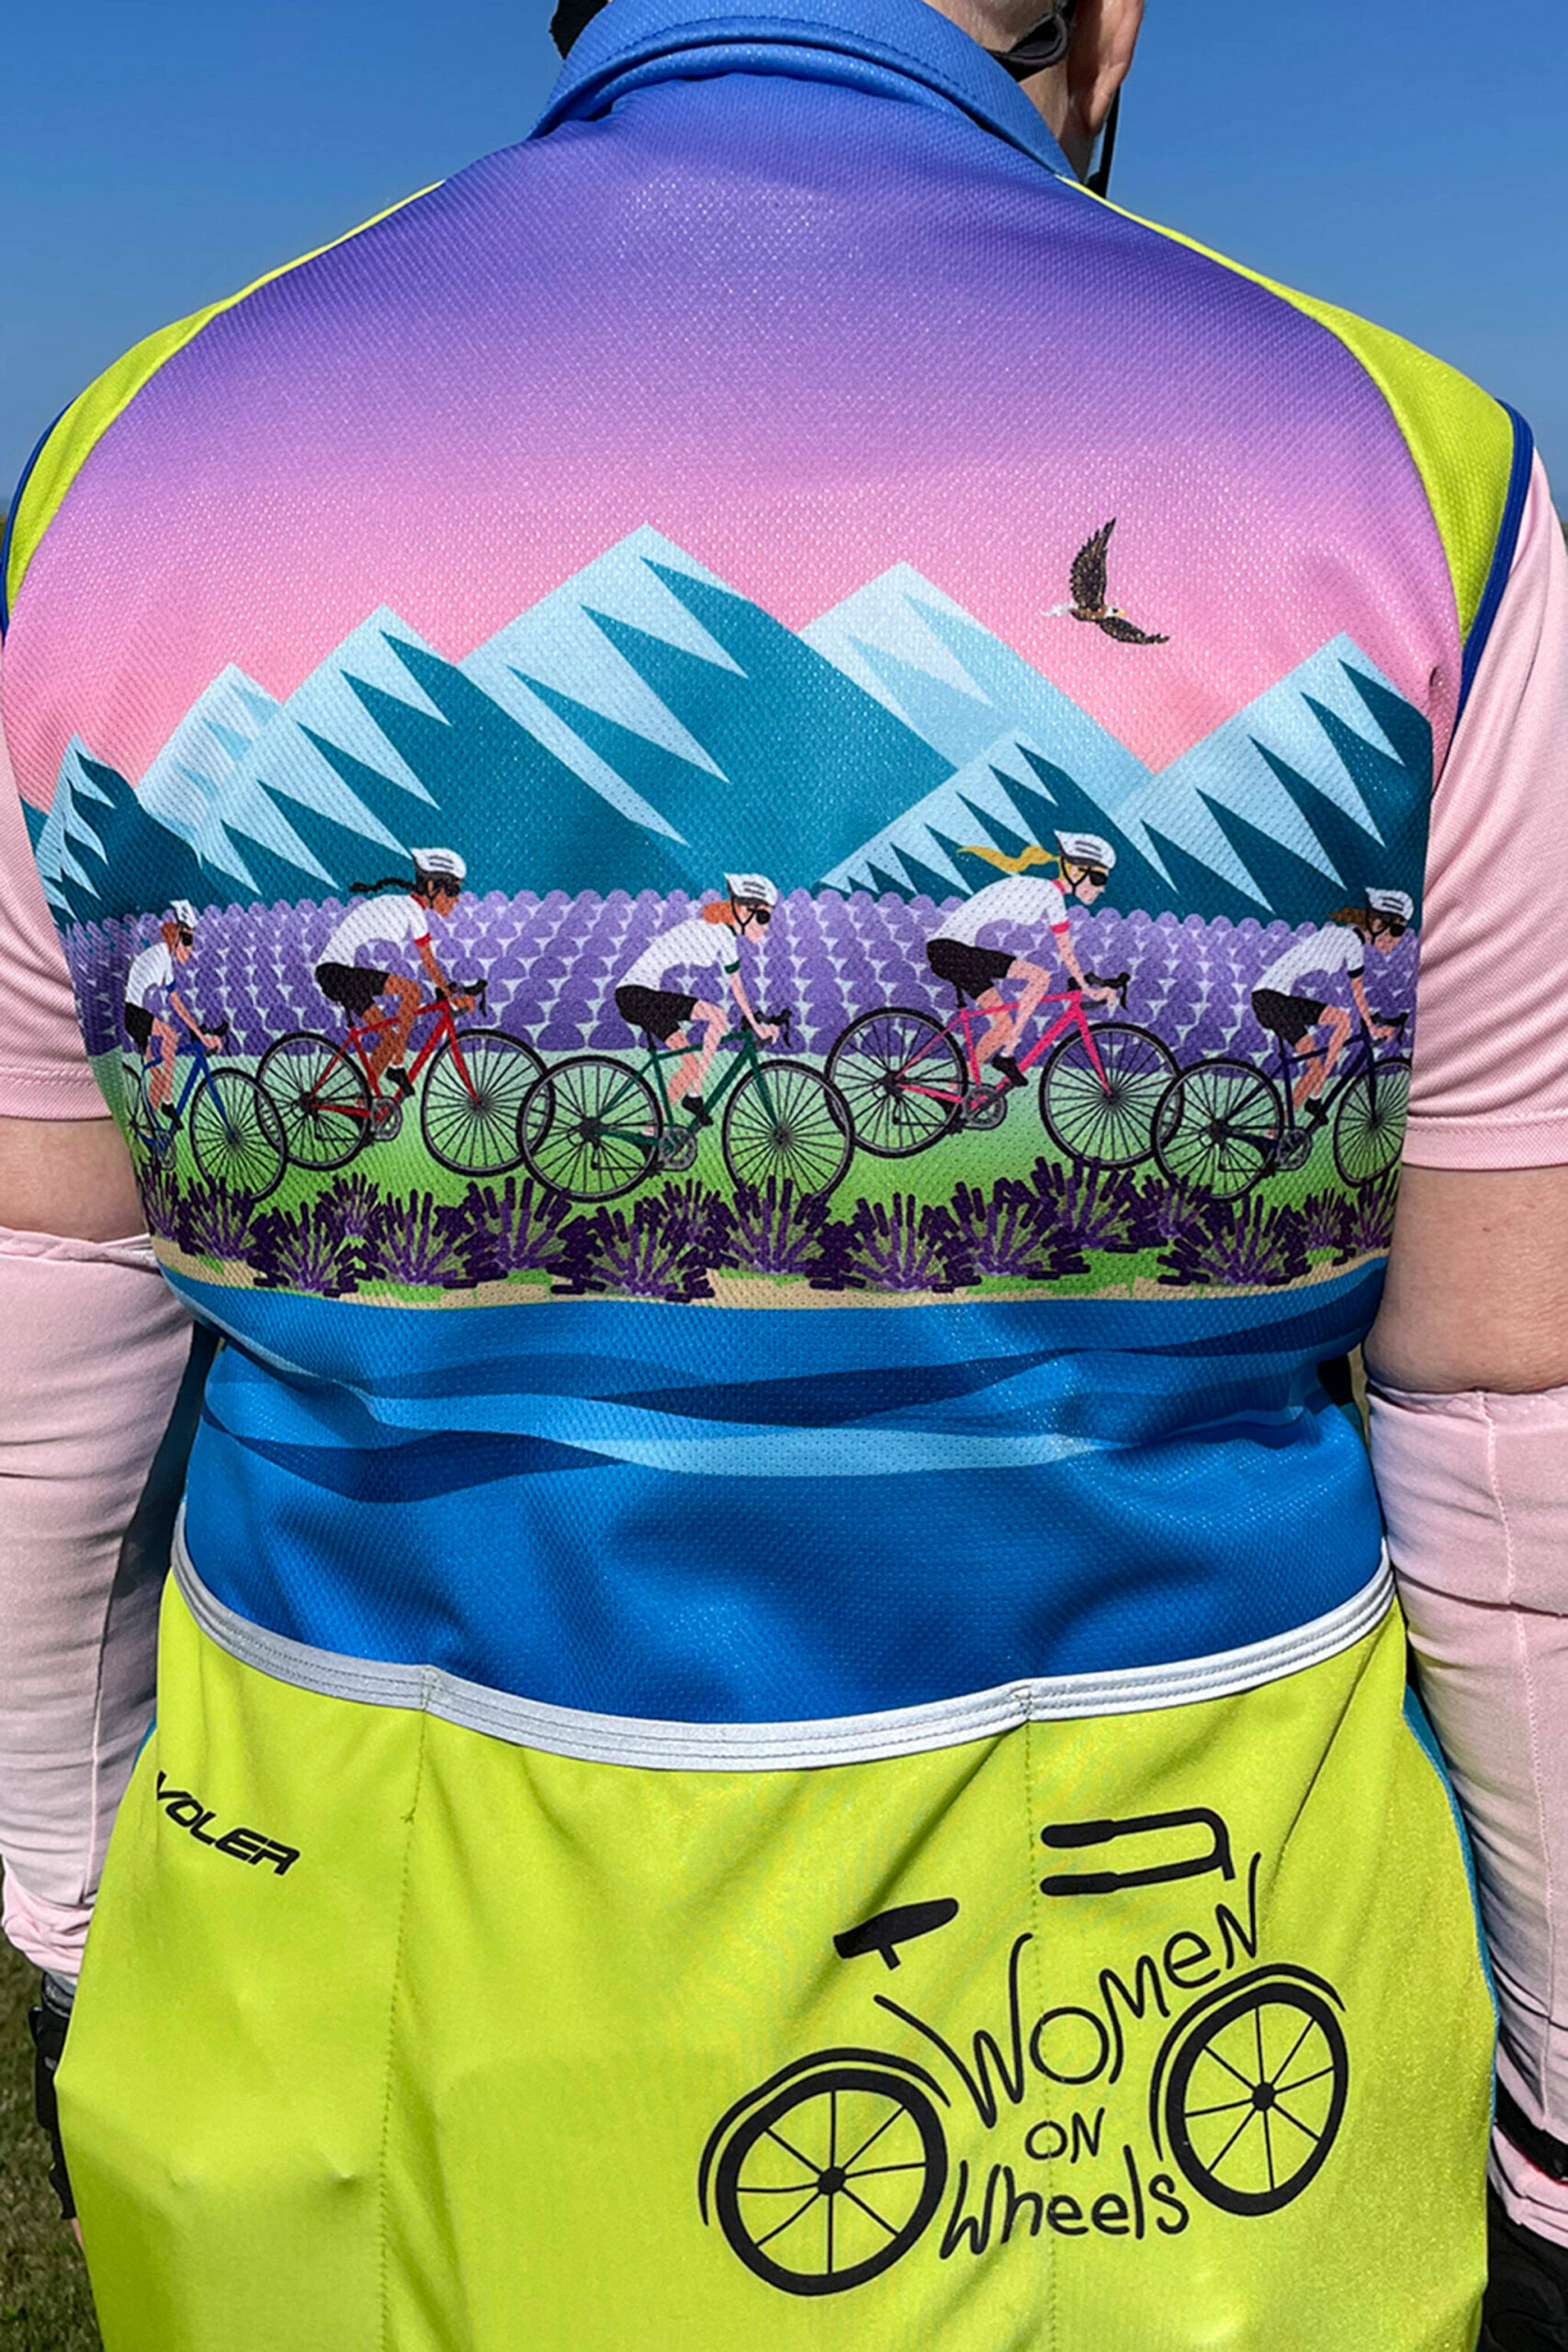 Sequim Gazette photo by Matthew Nash/ If you see this colorful jersey on Sequim’s roads, it belongs to one of the 70 Women on Wheels (WOW), a cycling group of women ages 55-80. The jersey was co-designed by Natalie Elfant.